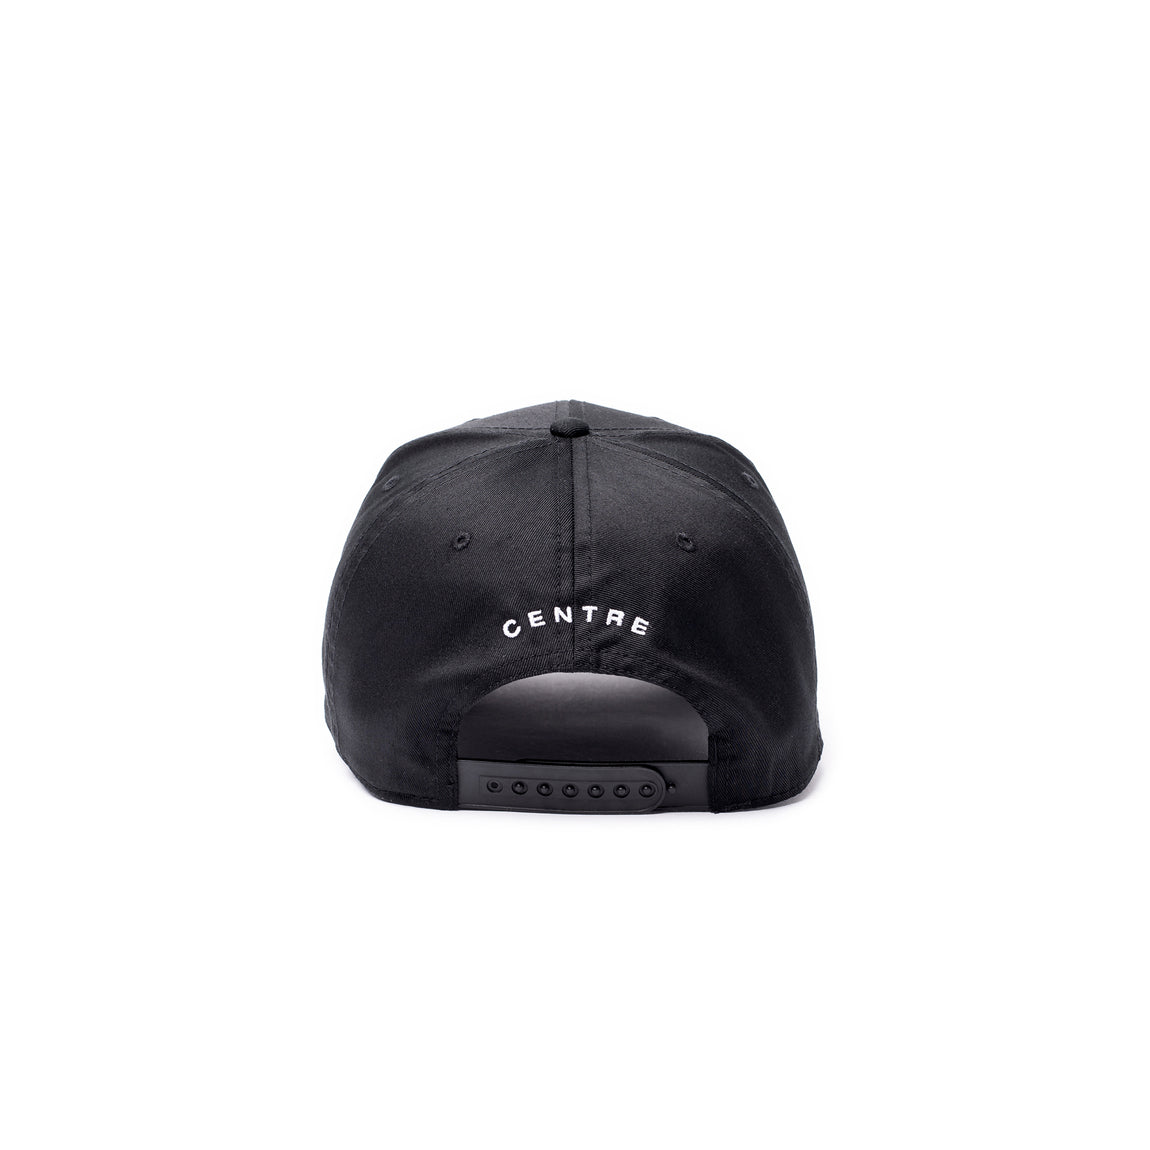 Centre Deeply Rooted Snapback Hat (Black) - Centre Deeply Rooted Snapback Hat (Black) - 